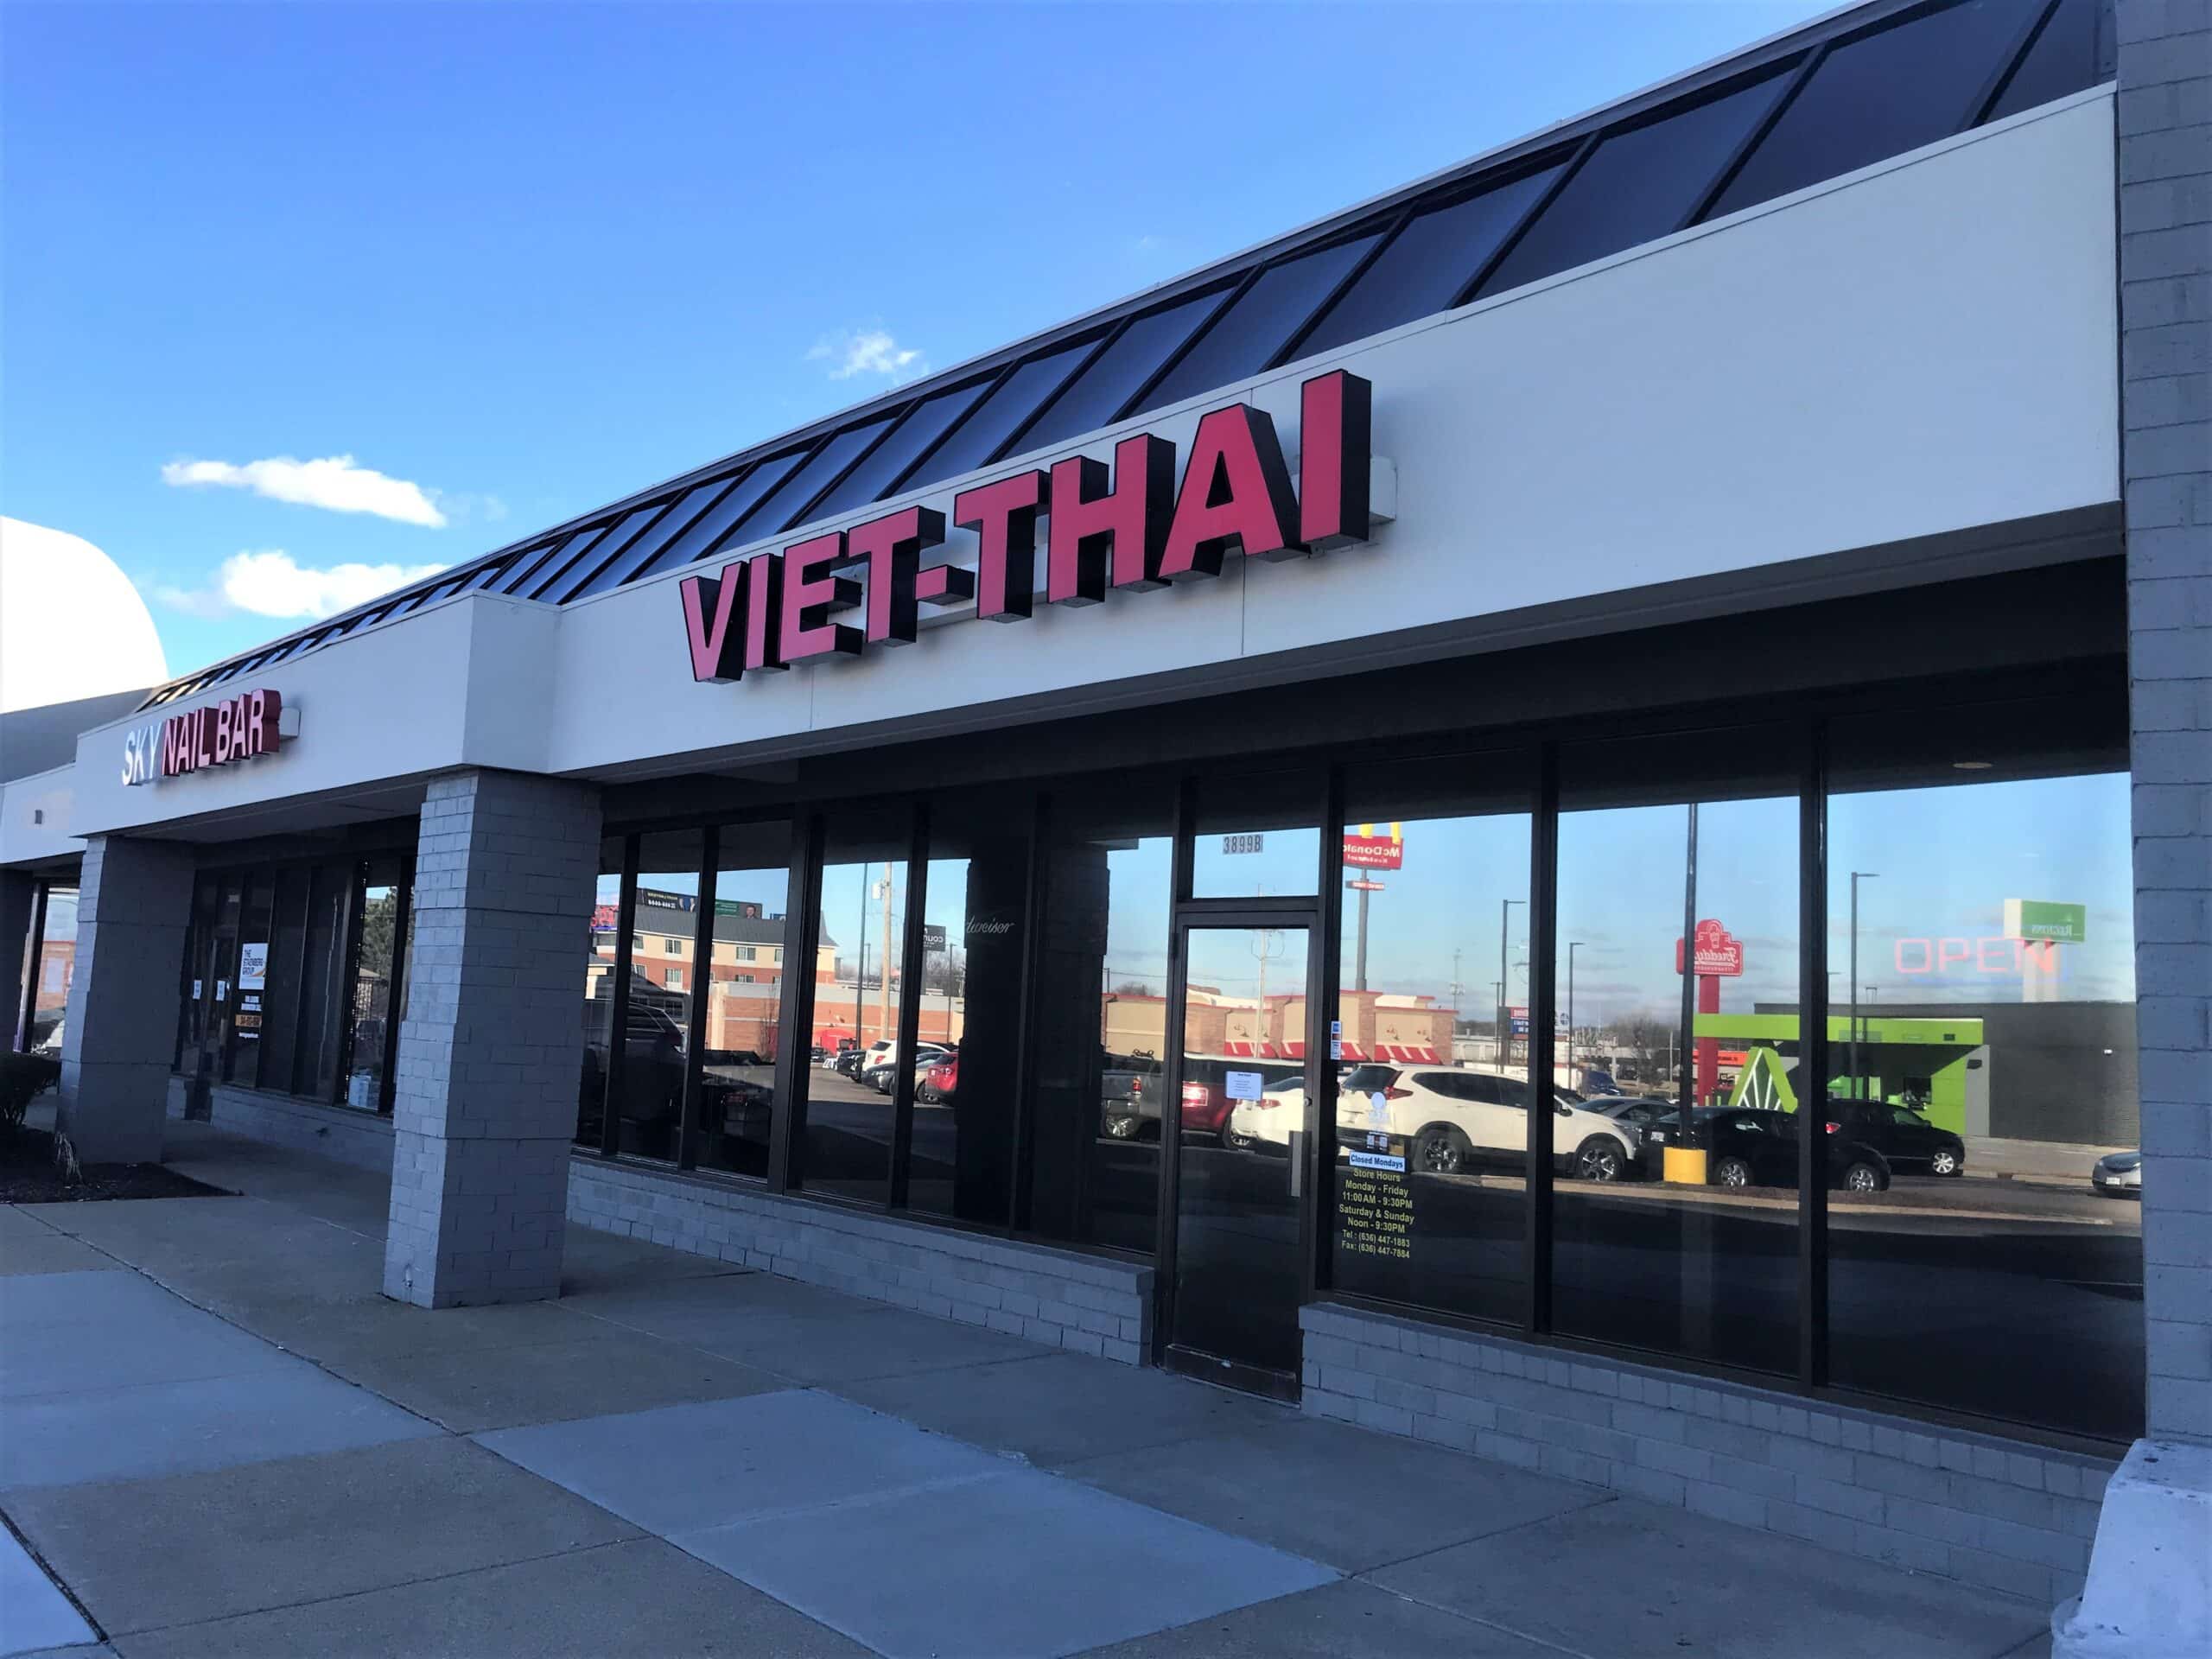 Restaurant Review – Viet Thai in St. Peters, MO